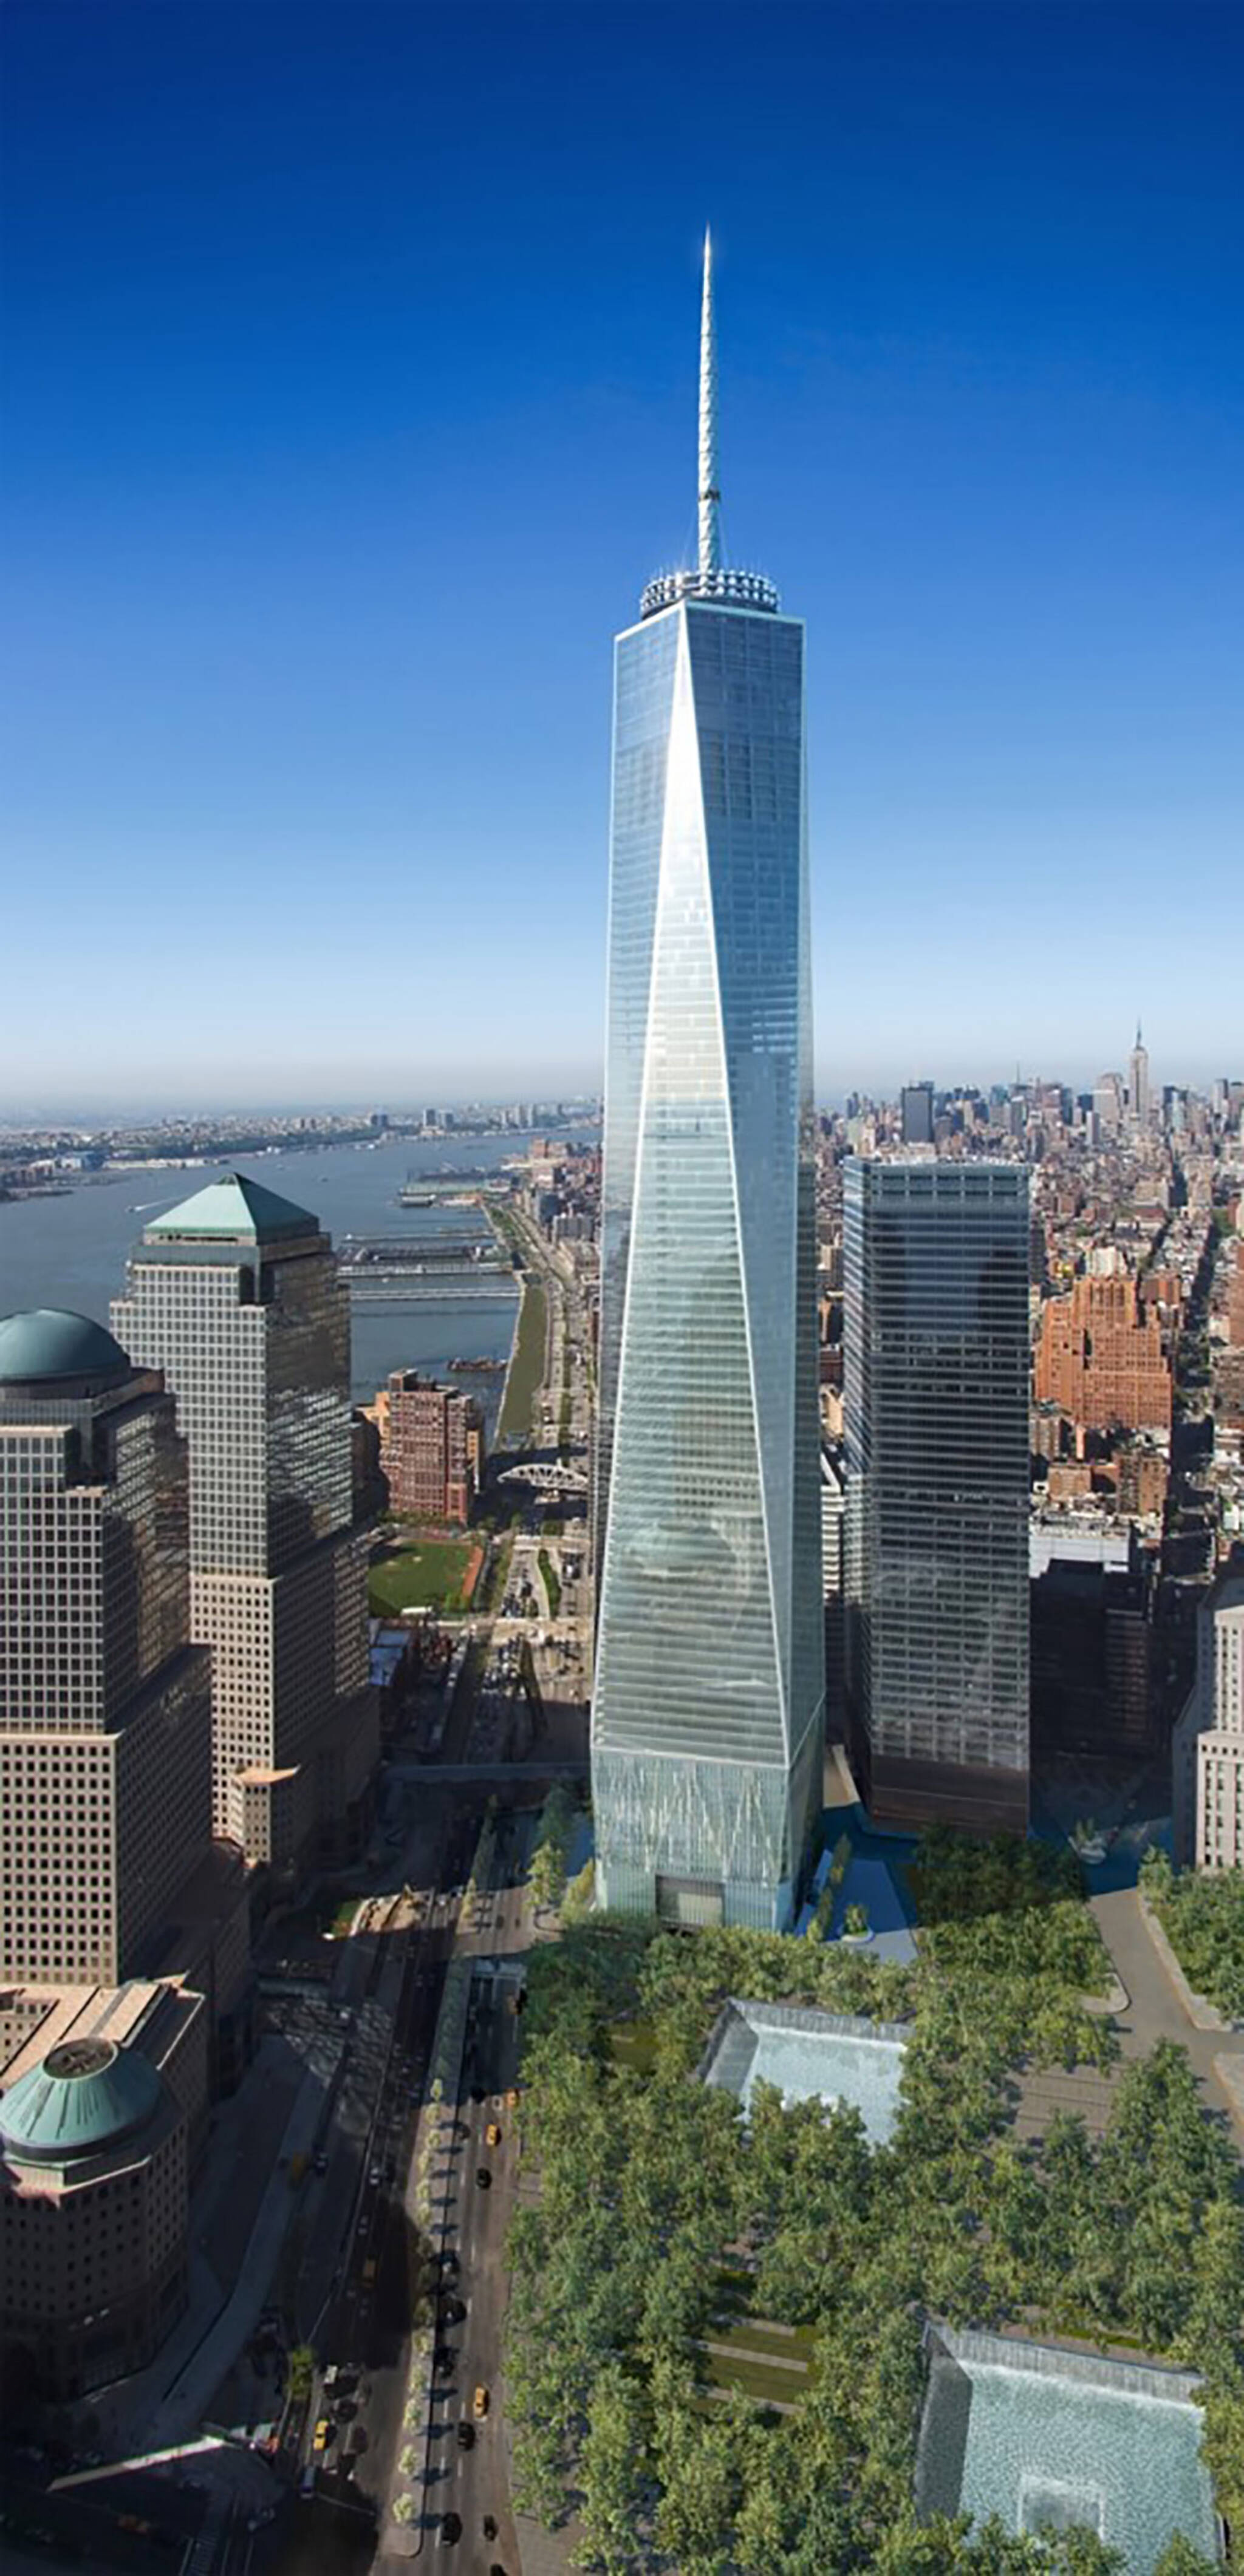 Aerial view of the One World Trade Center for the Rising: Rebuilding Ground Zero documentary Co-produced by Danny Forster and Steven Spielberg about the rebuilding of the World Trade Center site in the wake of 9/11.